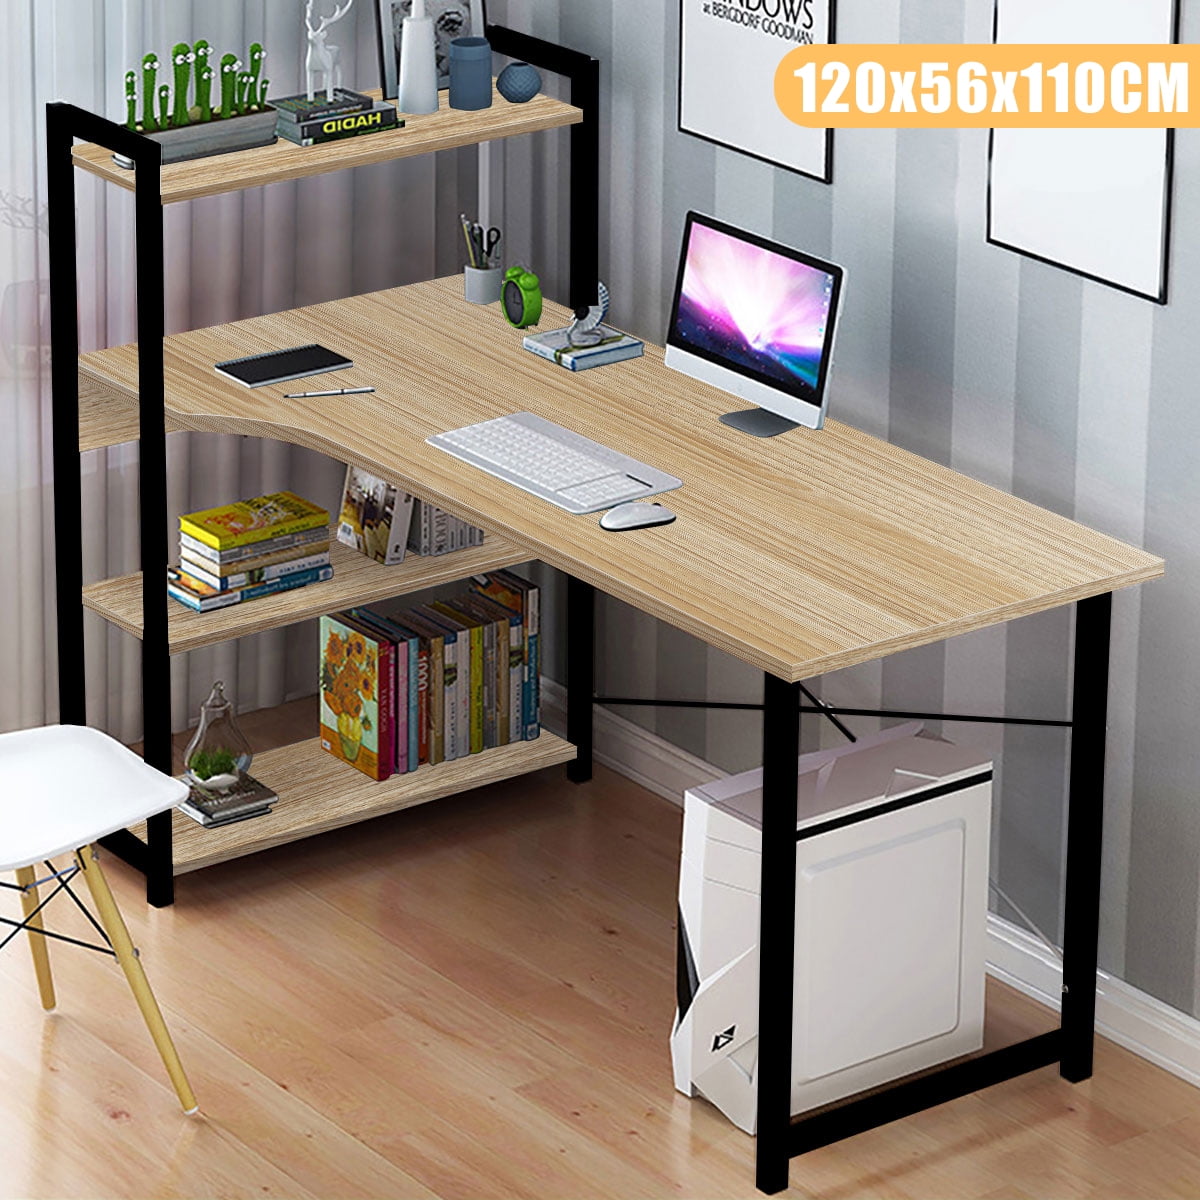 90cm Small Compact Computer Desk PC Table Workstation Home Office Study Writi 